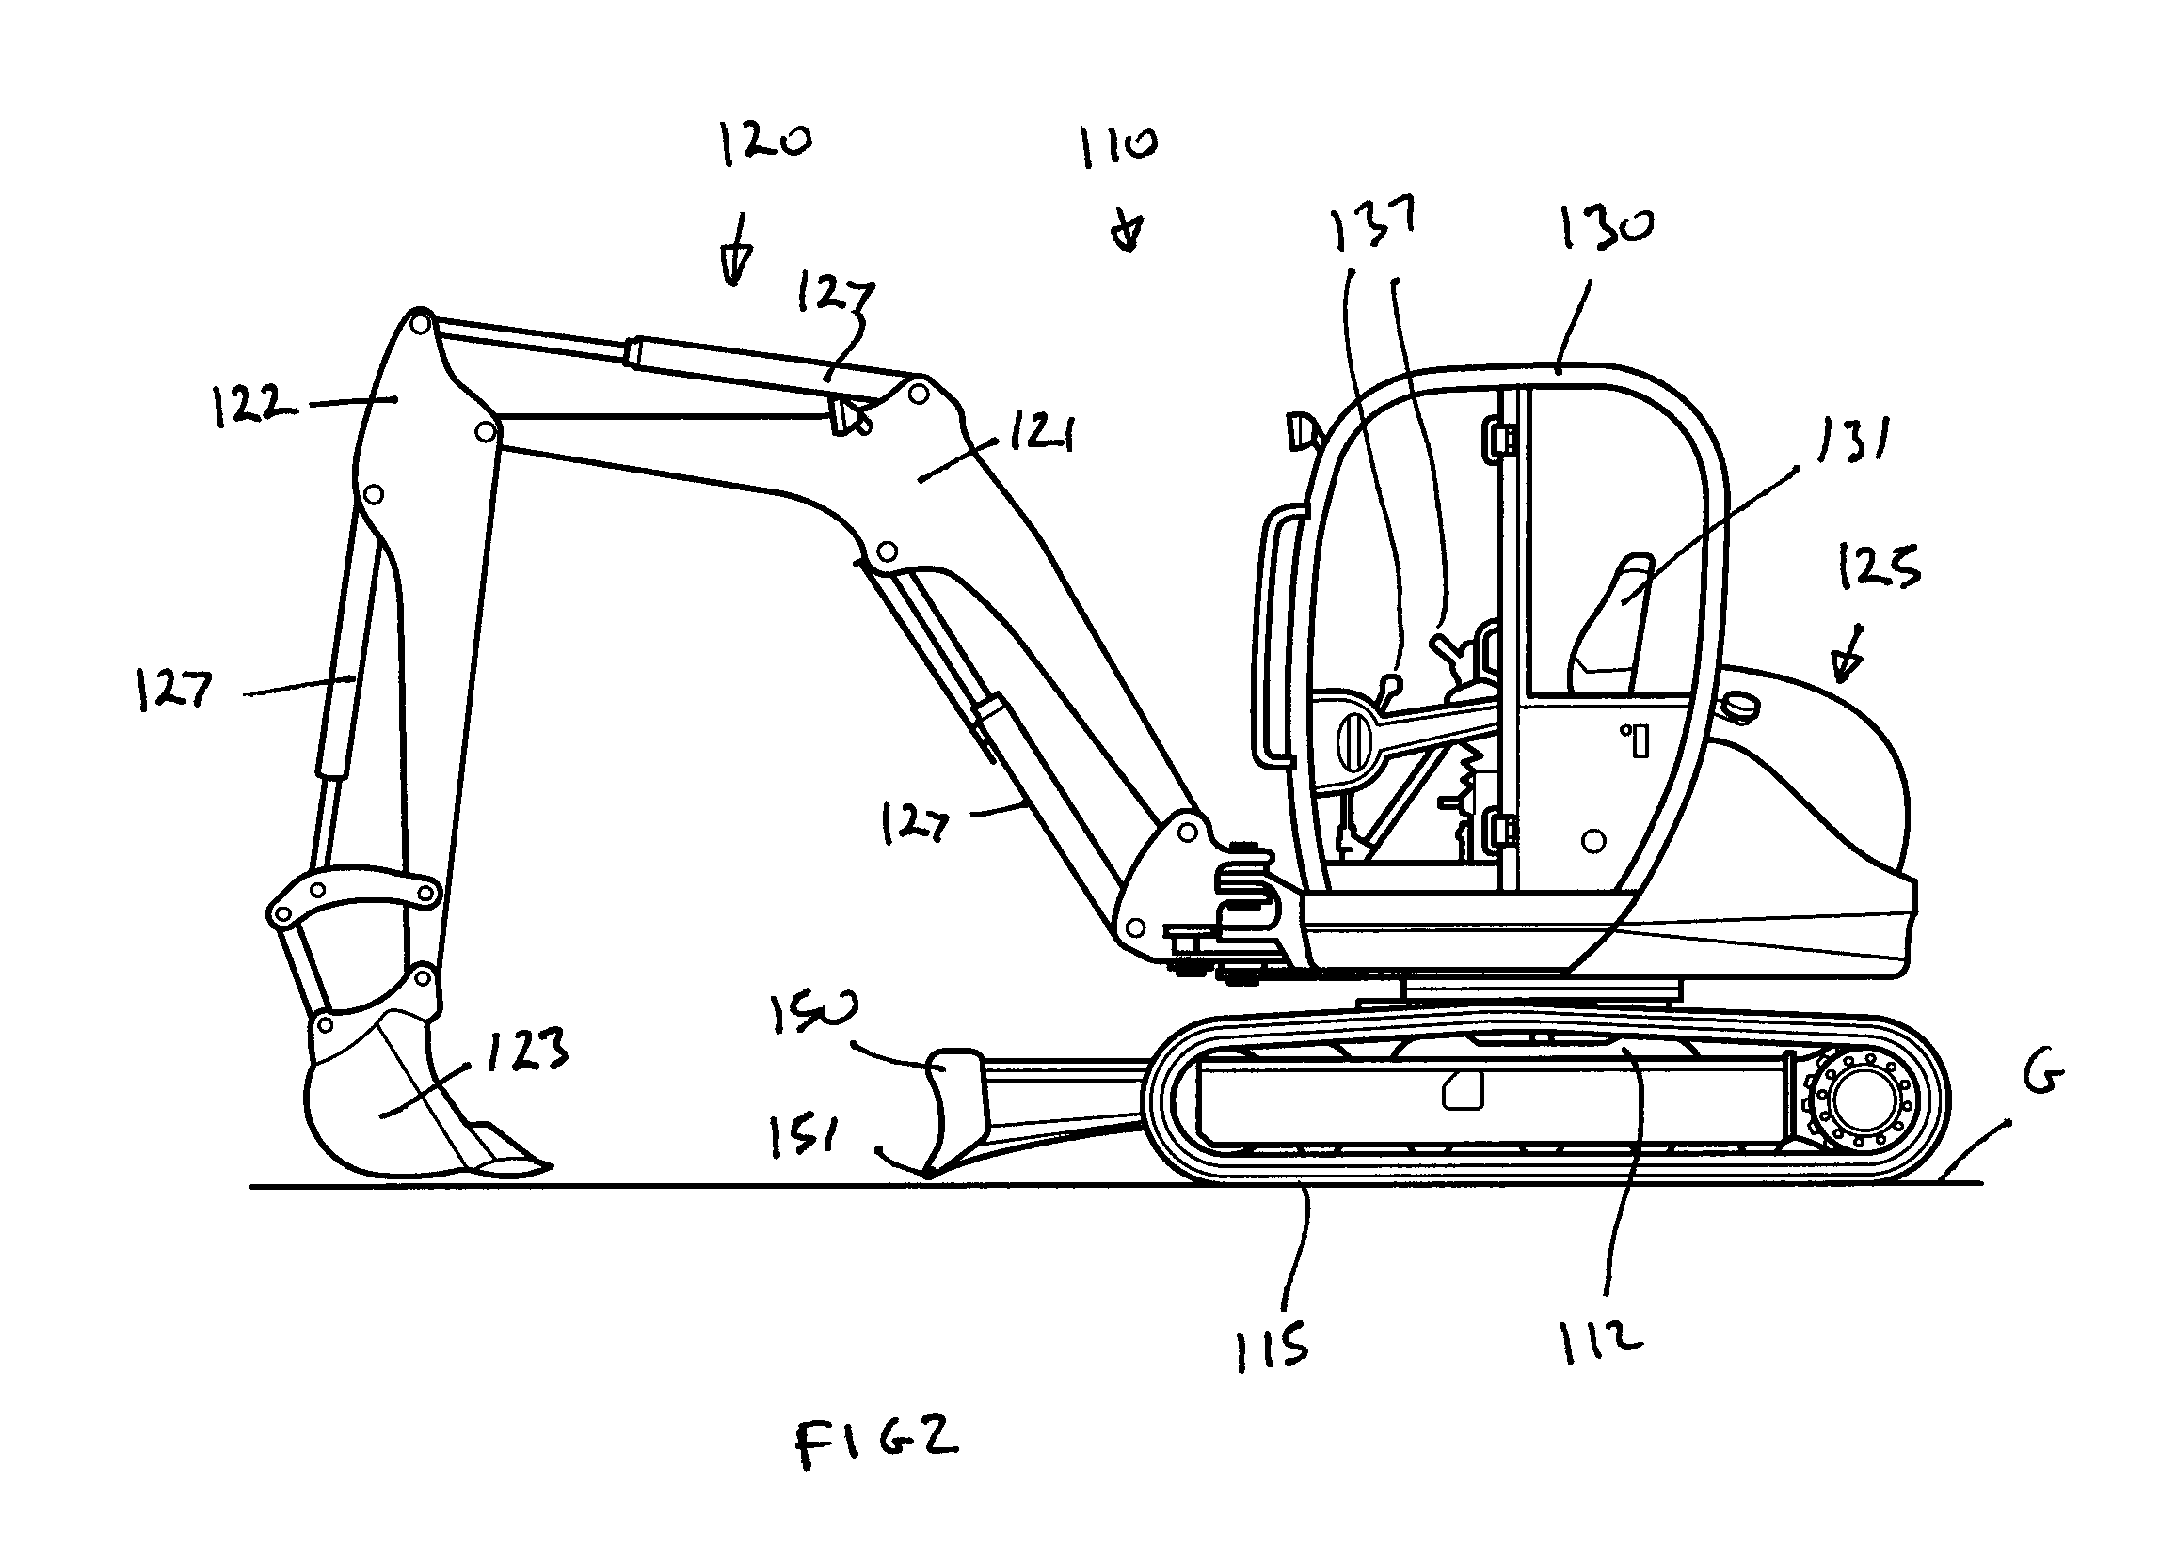 Method of operating a material handling machine